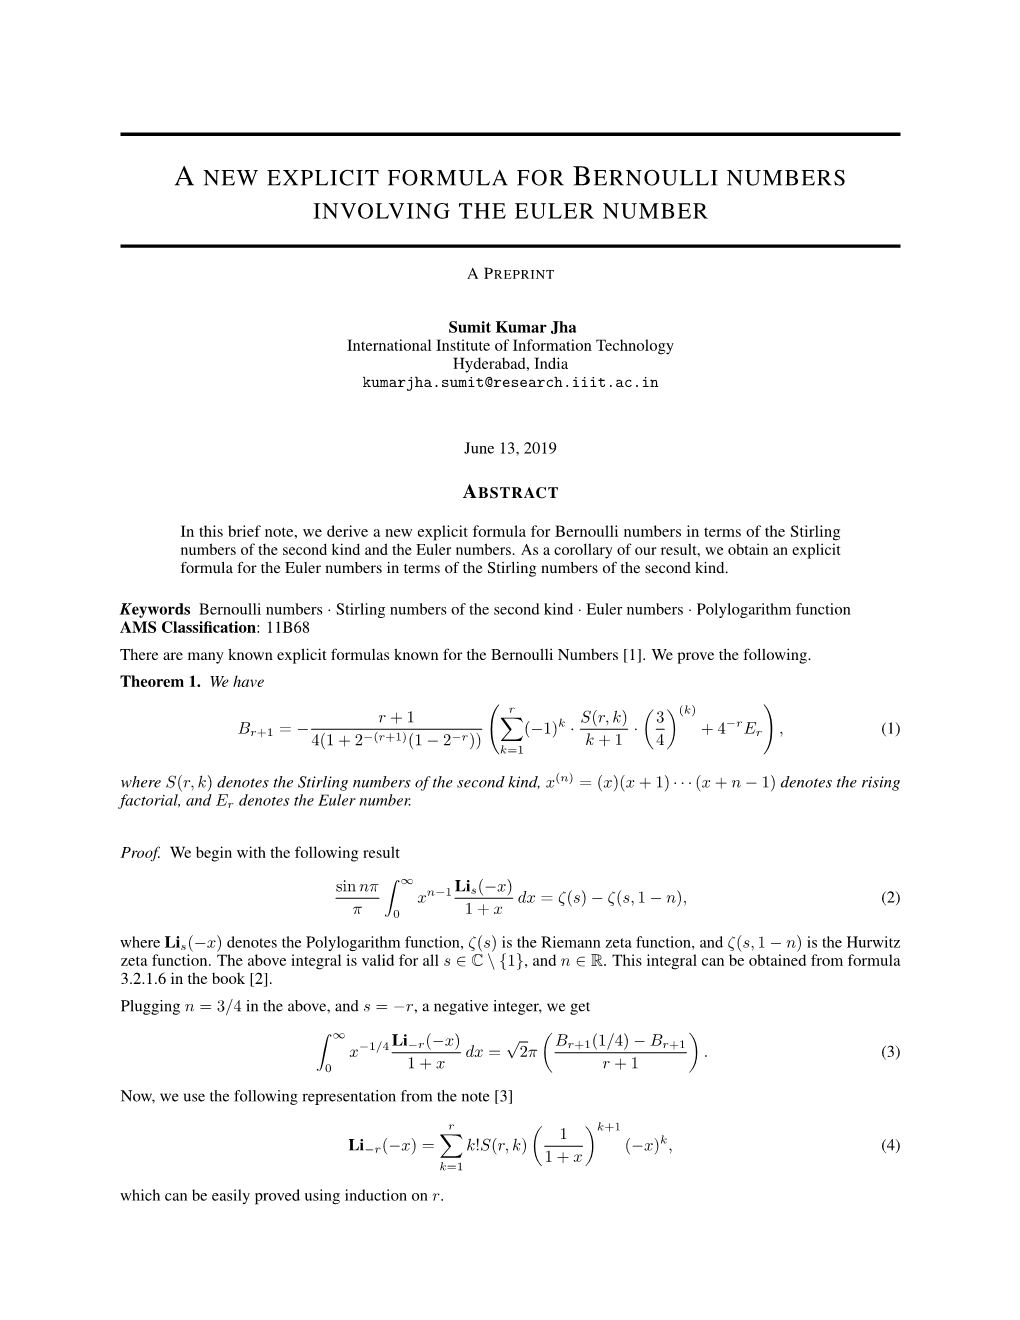 A New Explicit Formula for Bernoulli Numbers in Terms of the Stirling Numbers of the Second Kind and the Euler Numbers